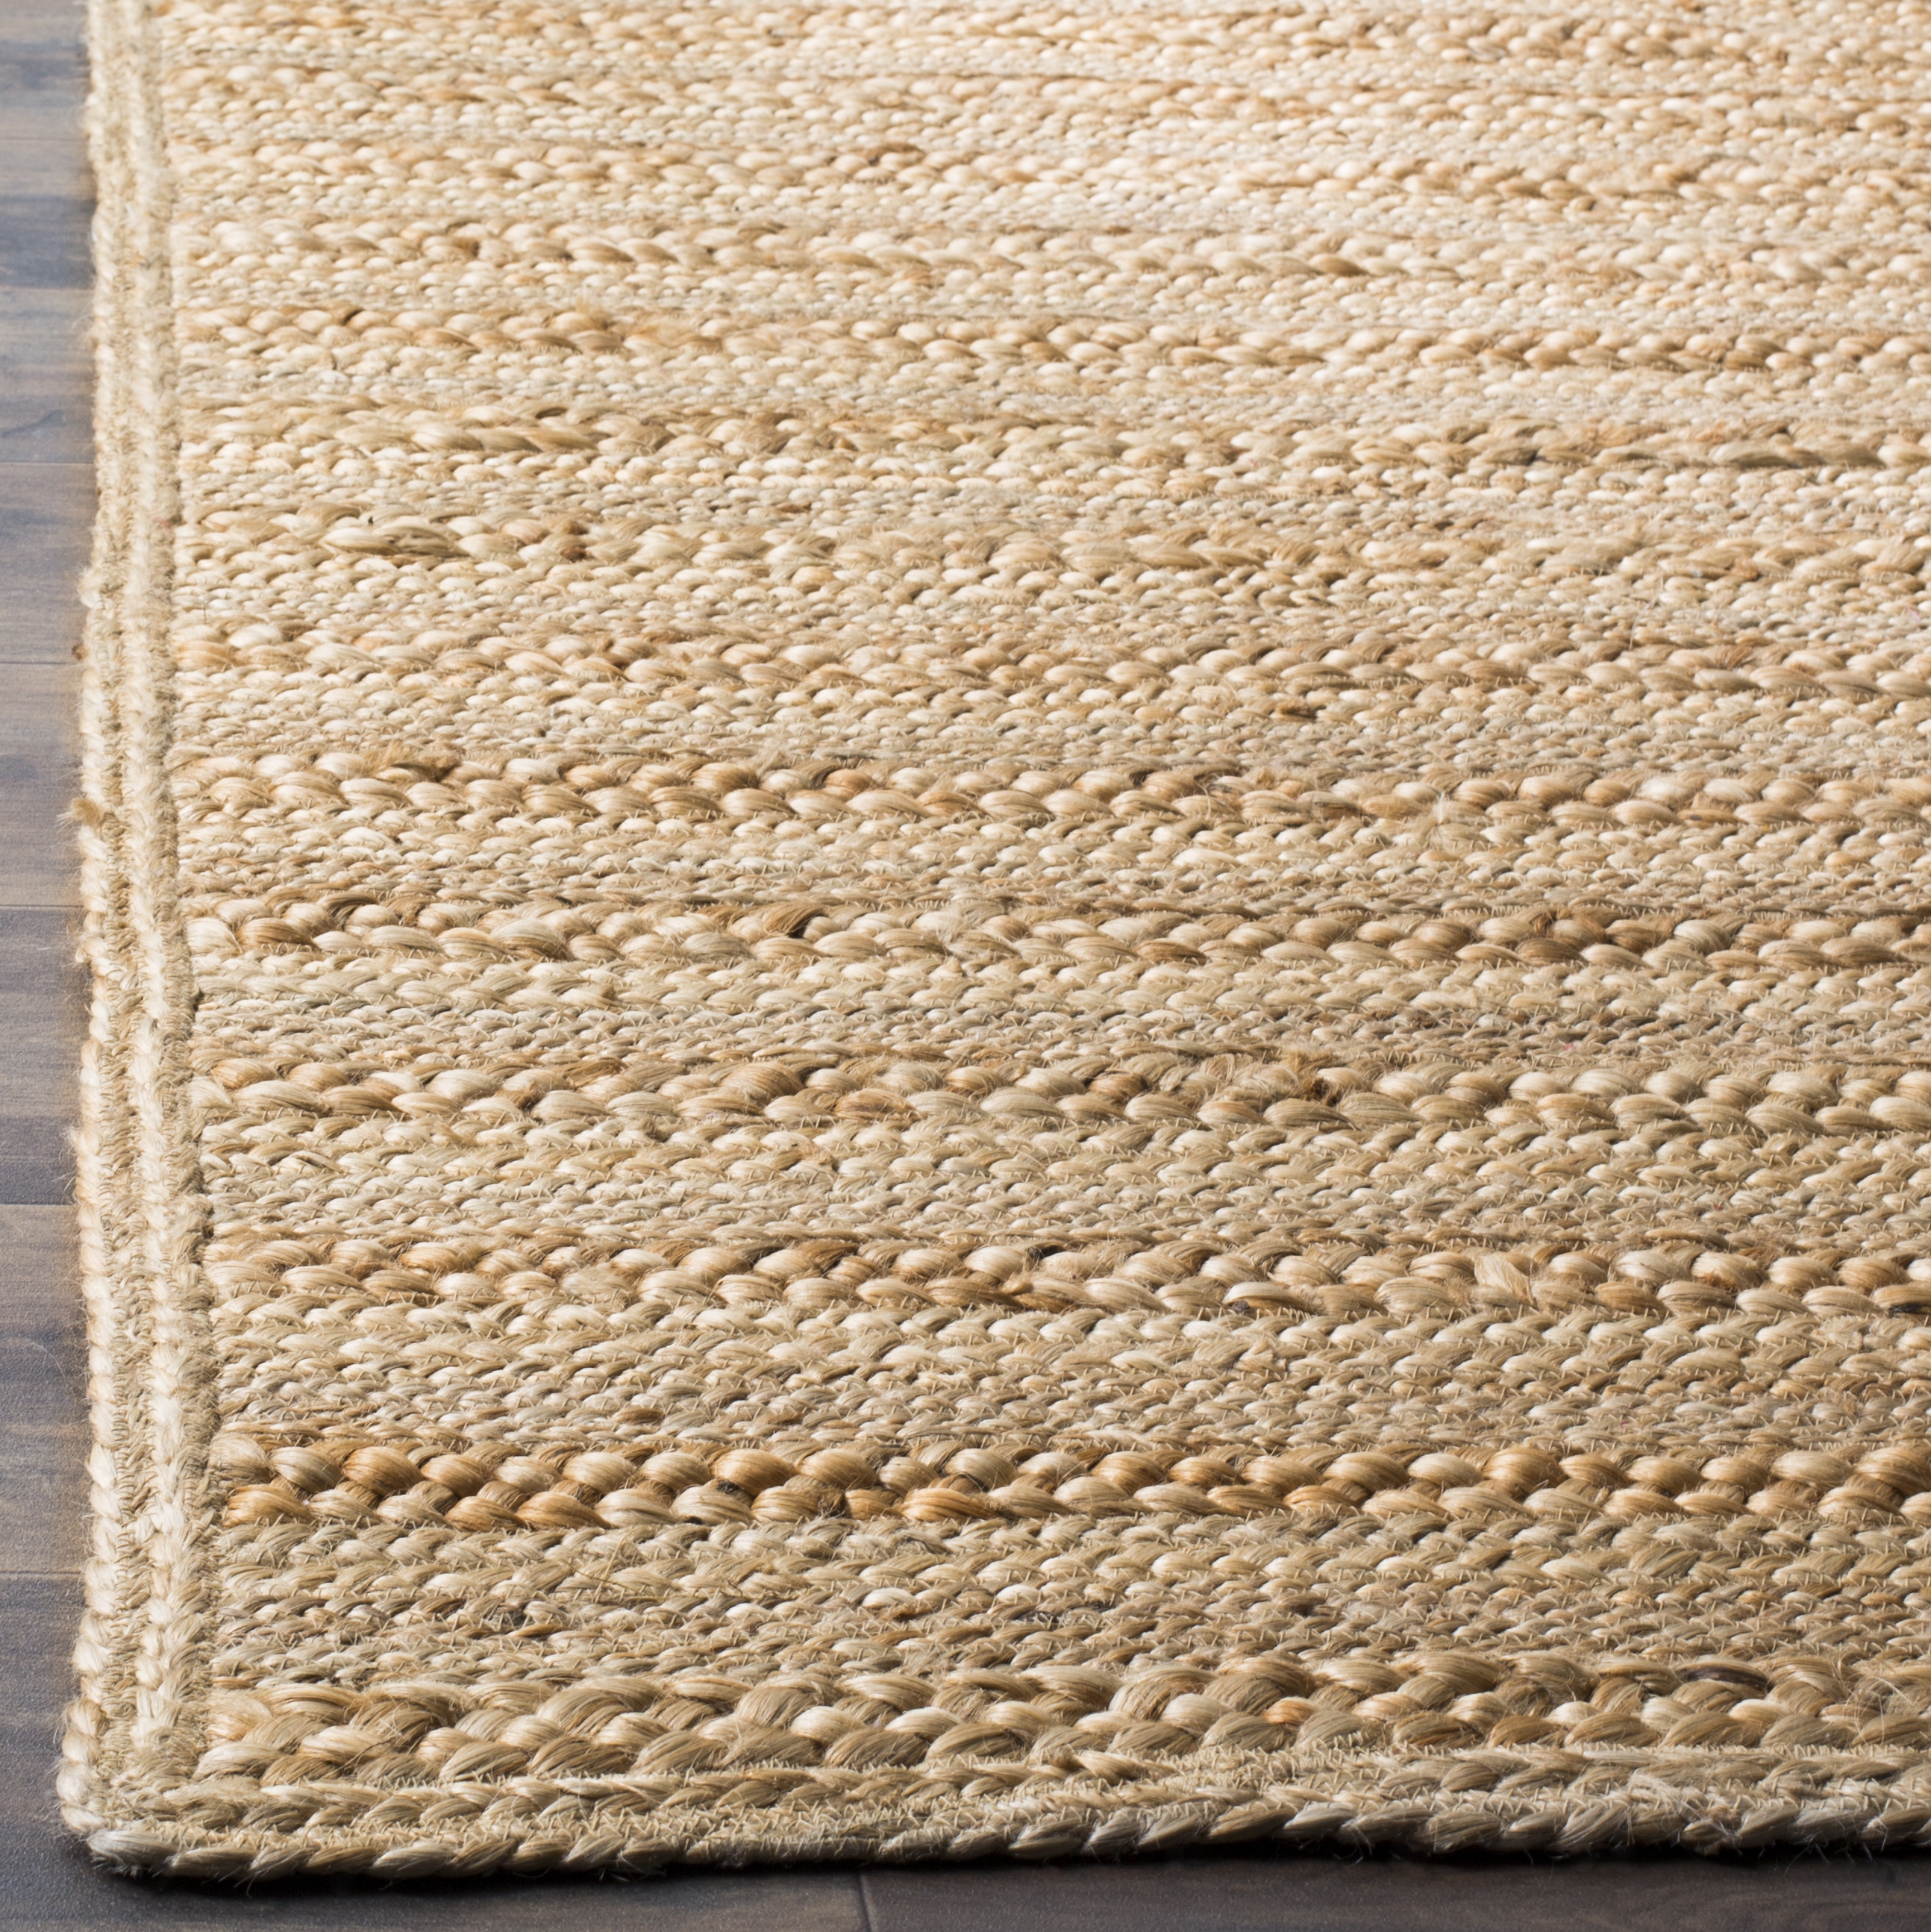 Arlo Home Hand Woven Area Rug, NF871A, Natural,  3' X 5' - Image 1